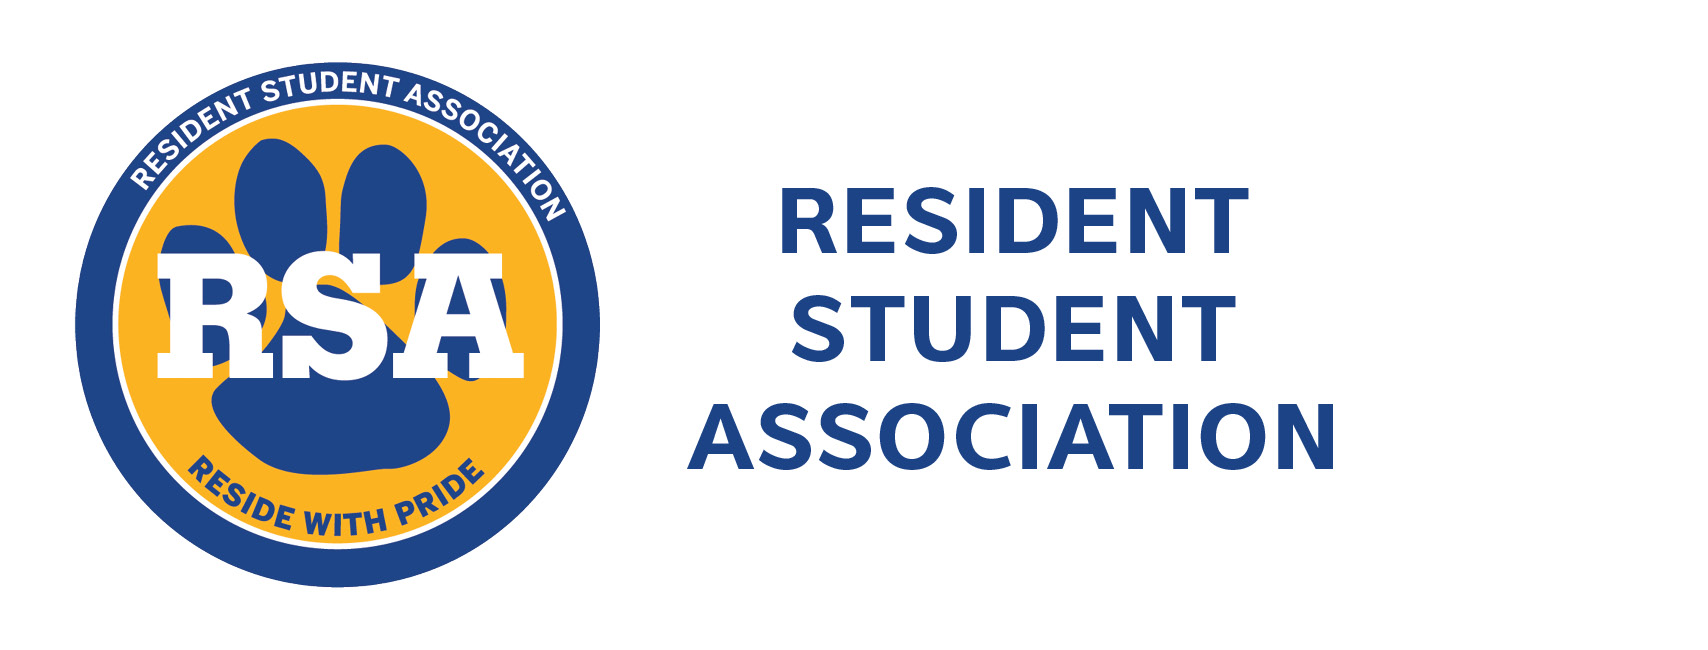 The Resident Student Association